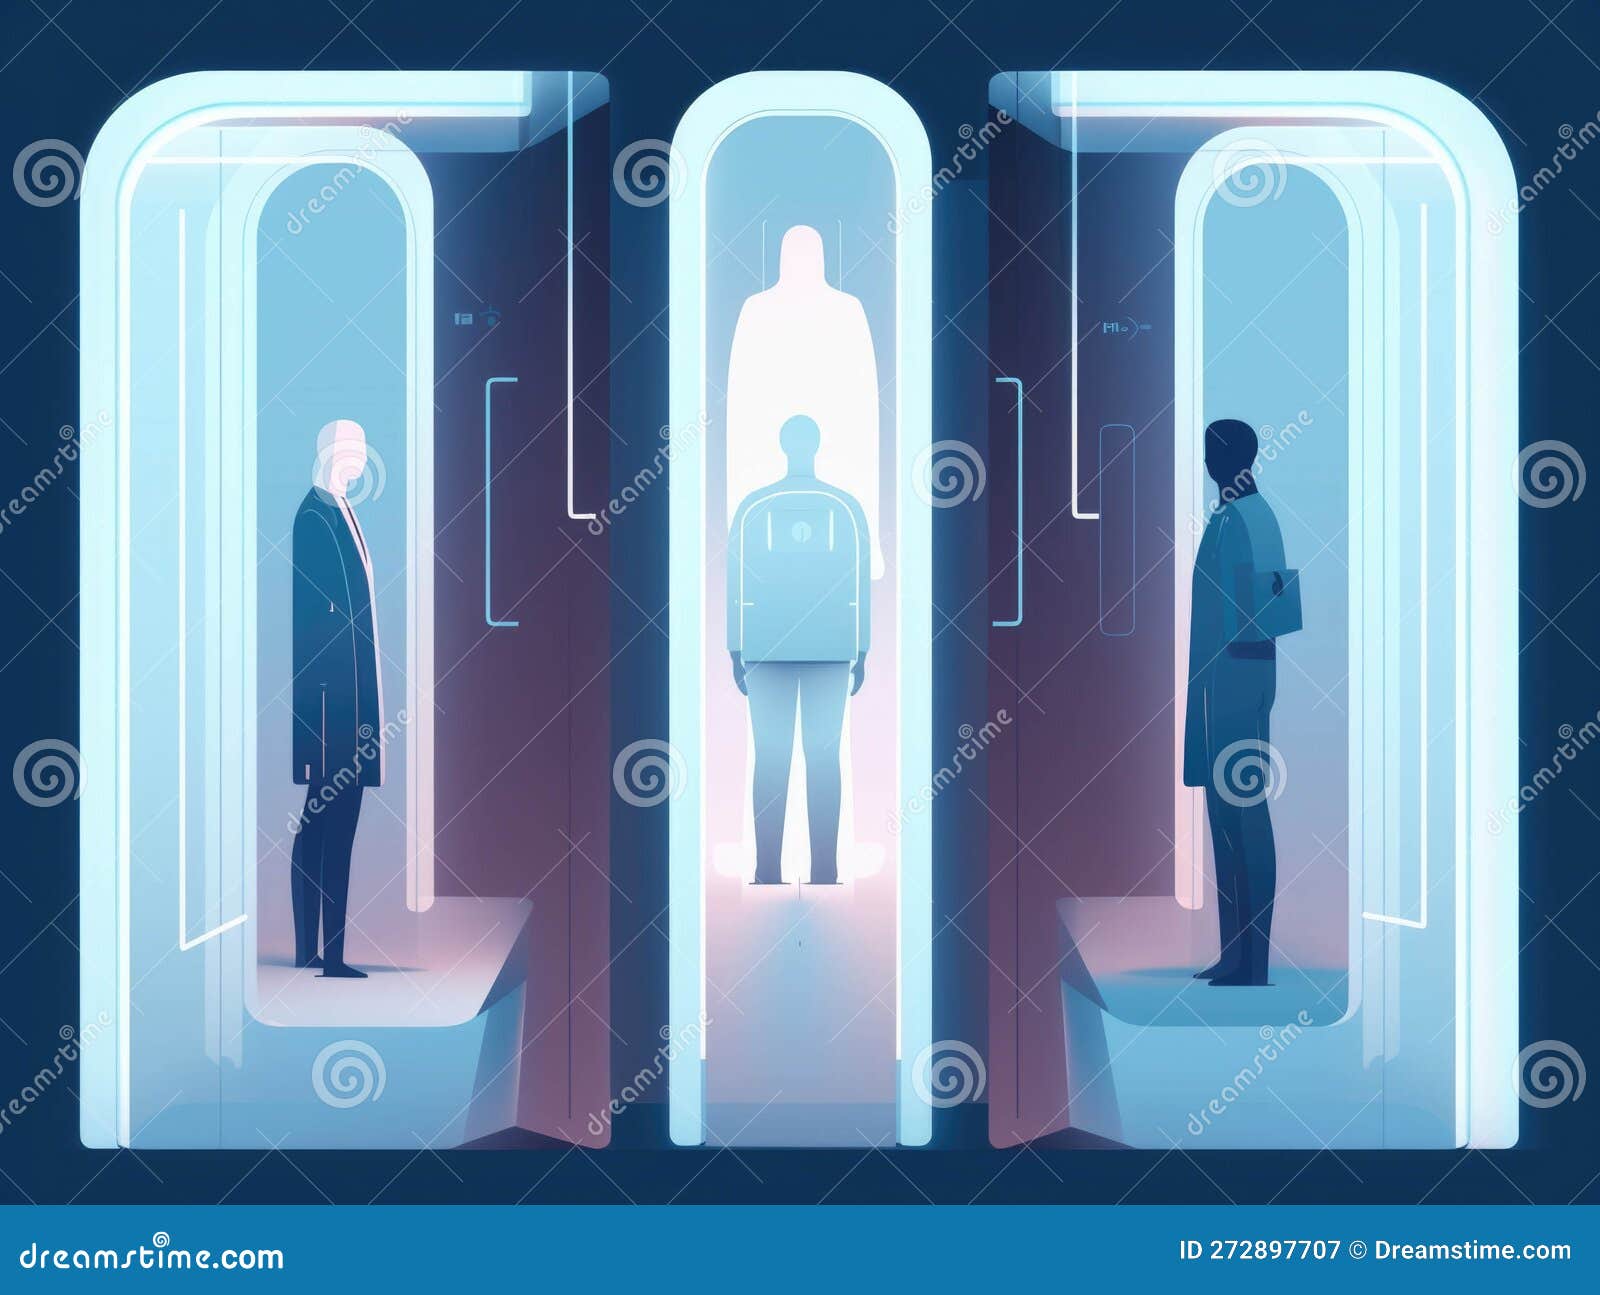 are we walking blindly into the unknown with ondemand body scanners and ai . ai generation